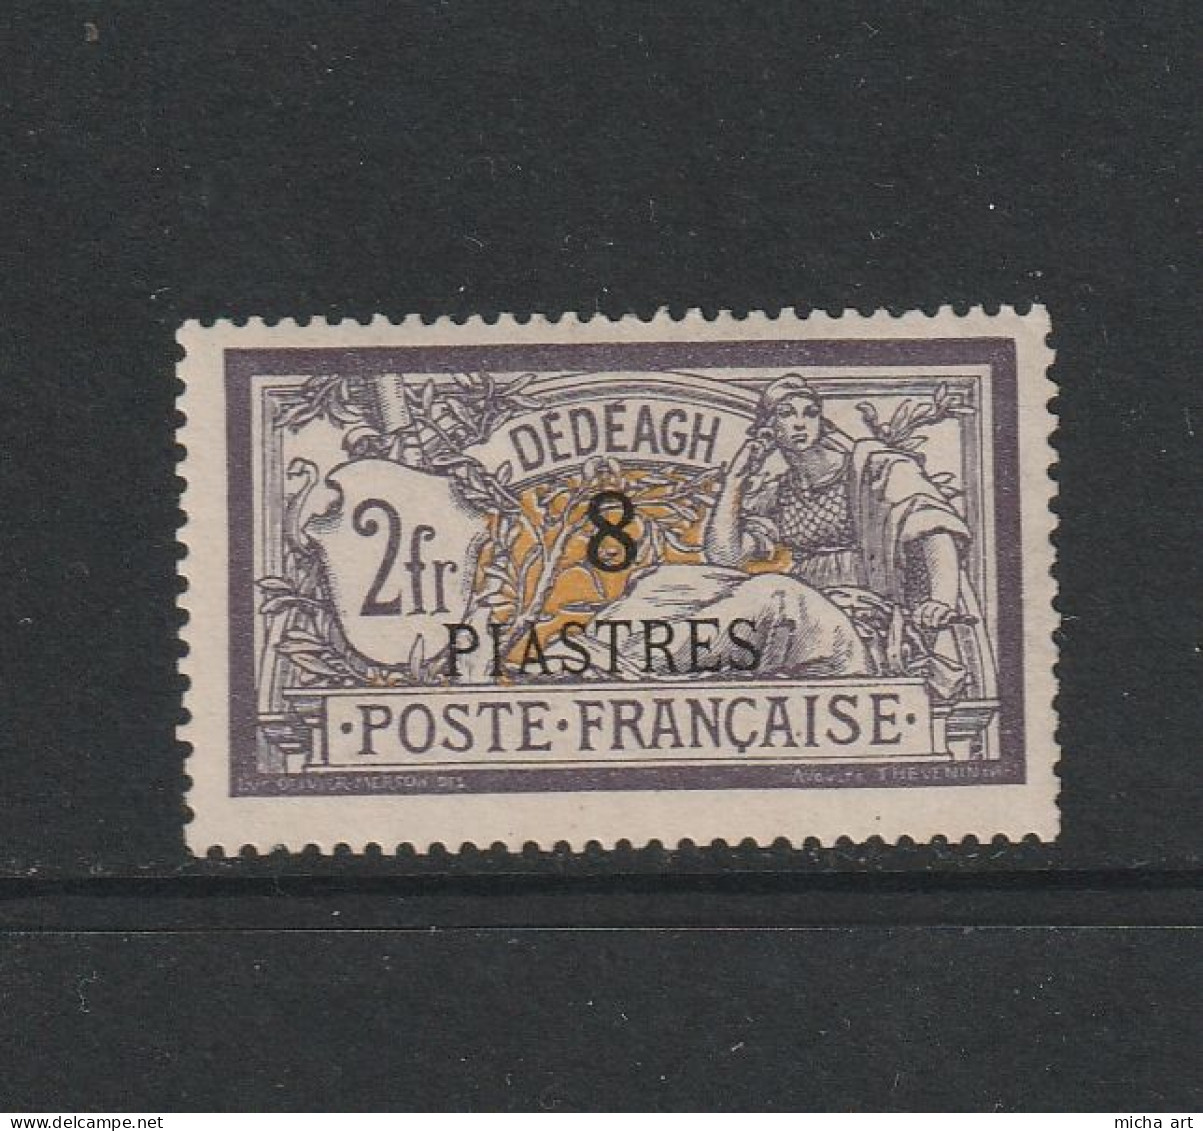 Greece French Post Office 1902 - 1913 Dedeagh Issue 8 Pi / 2 F. MH W1101 - Ungebraucht